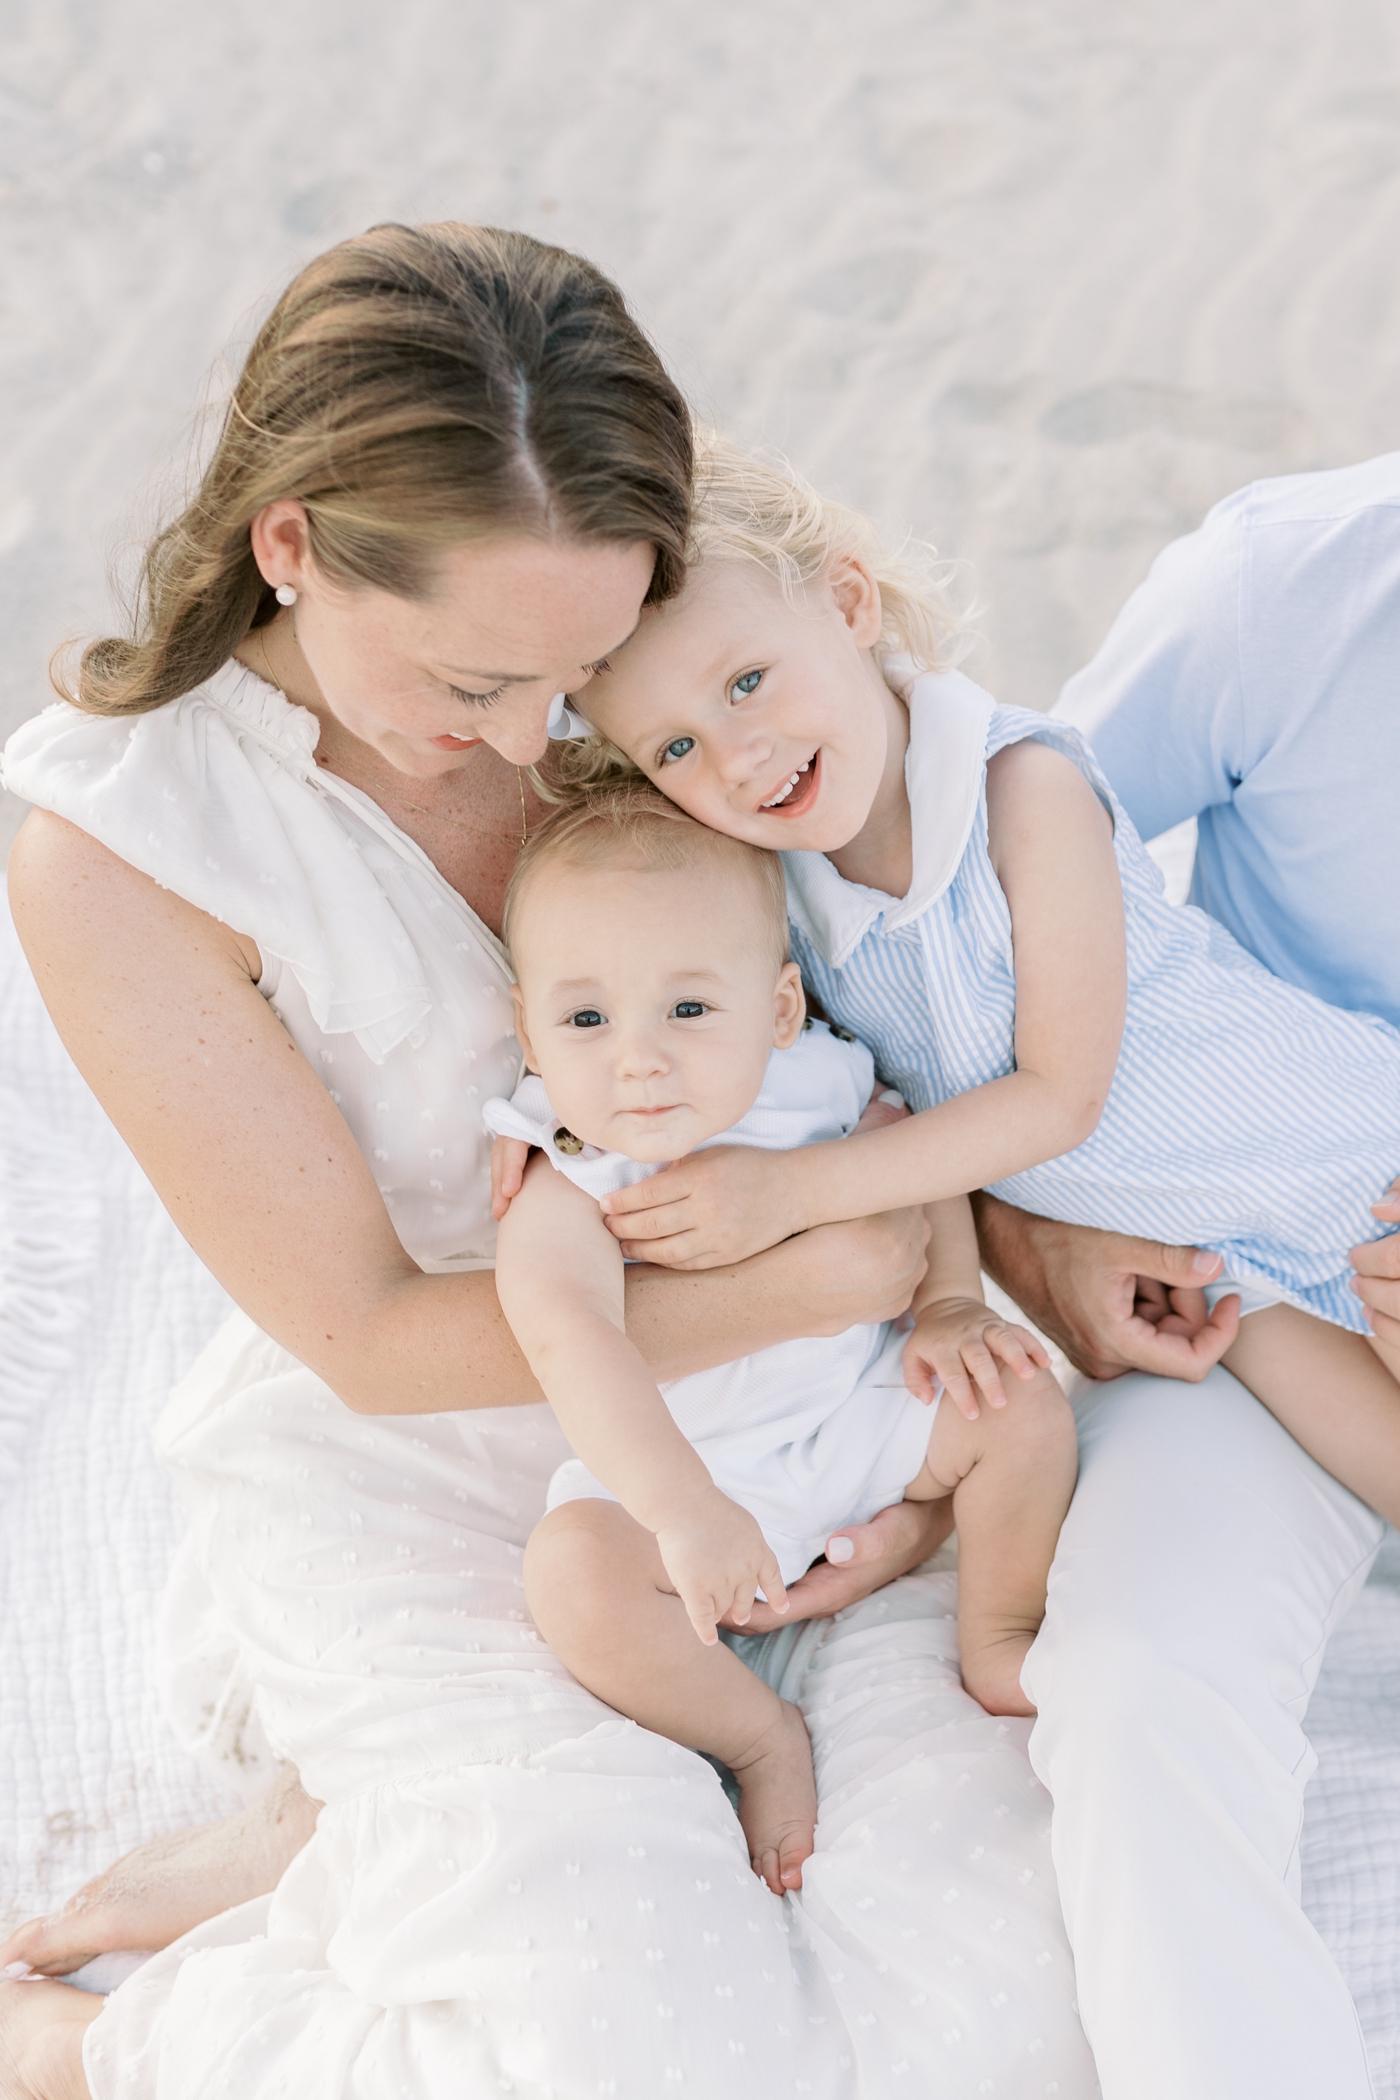 Mom snuggling with her little ones during their Isle of Palms Family Session |Photo by Caitlyn Motycka Photography.